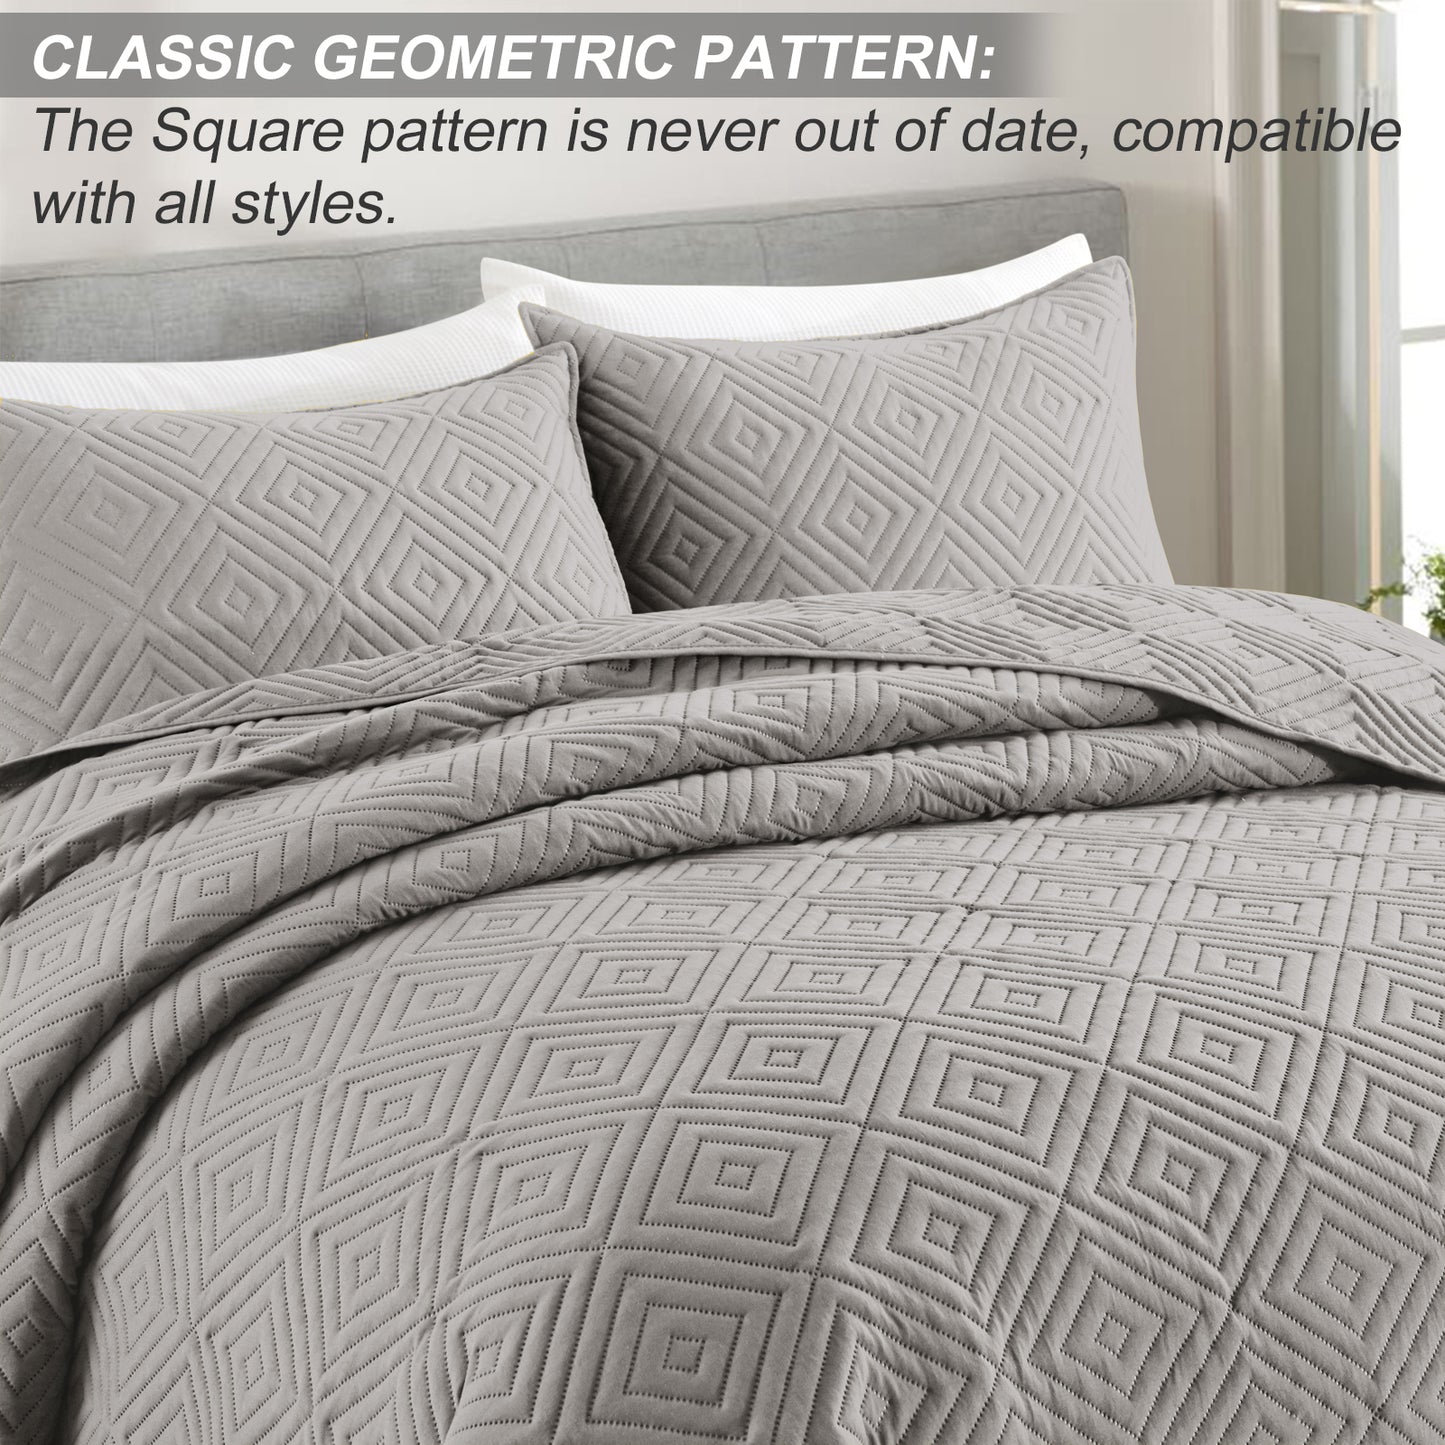 Exclusivo Mezcla 2-Piece Light Gray Twin Size Quilt Set, Square Pattern Ultrasonic Lightweight and Soft Quilts/Bedspreads/Coverlets/Bedding Set (1 Quilt, 1 Pillow Sham) for All Seasons